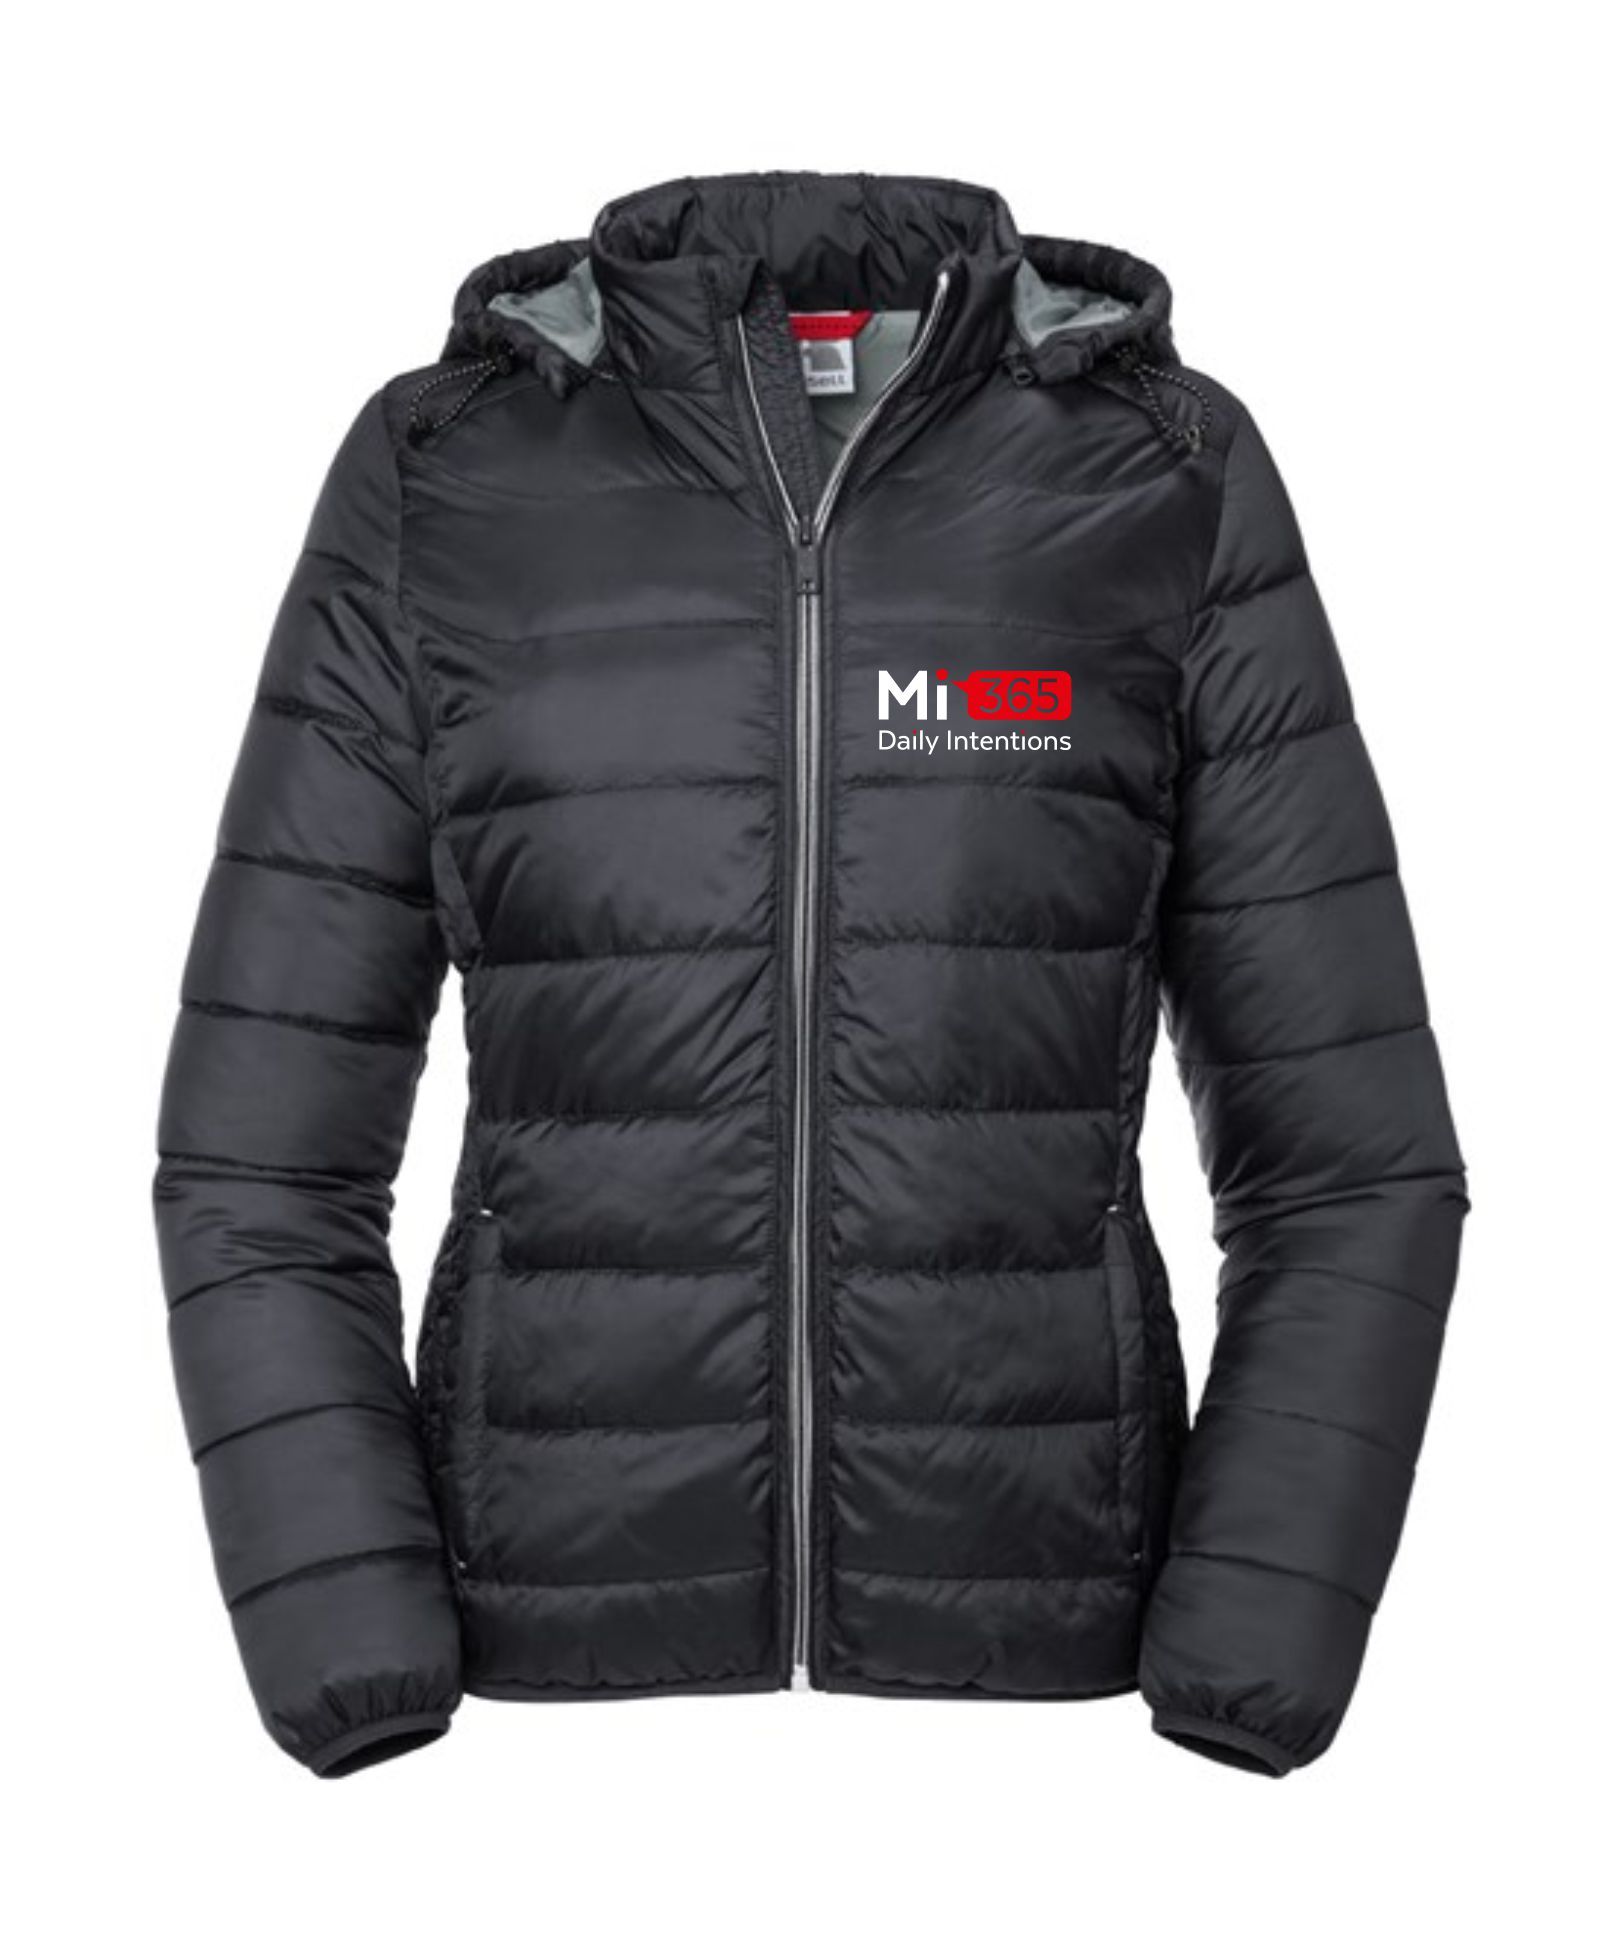 Mi365 Daily Intentions - Hooded jacket (Ladies)